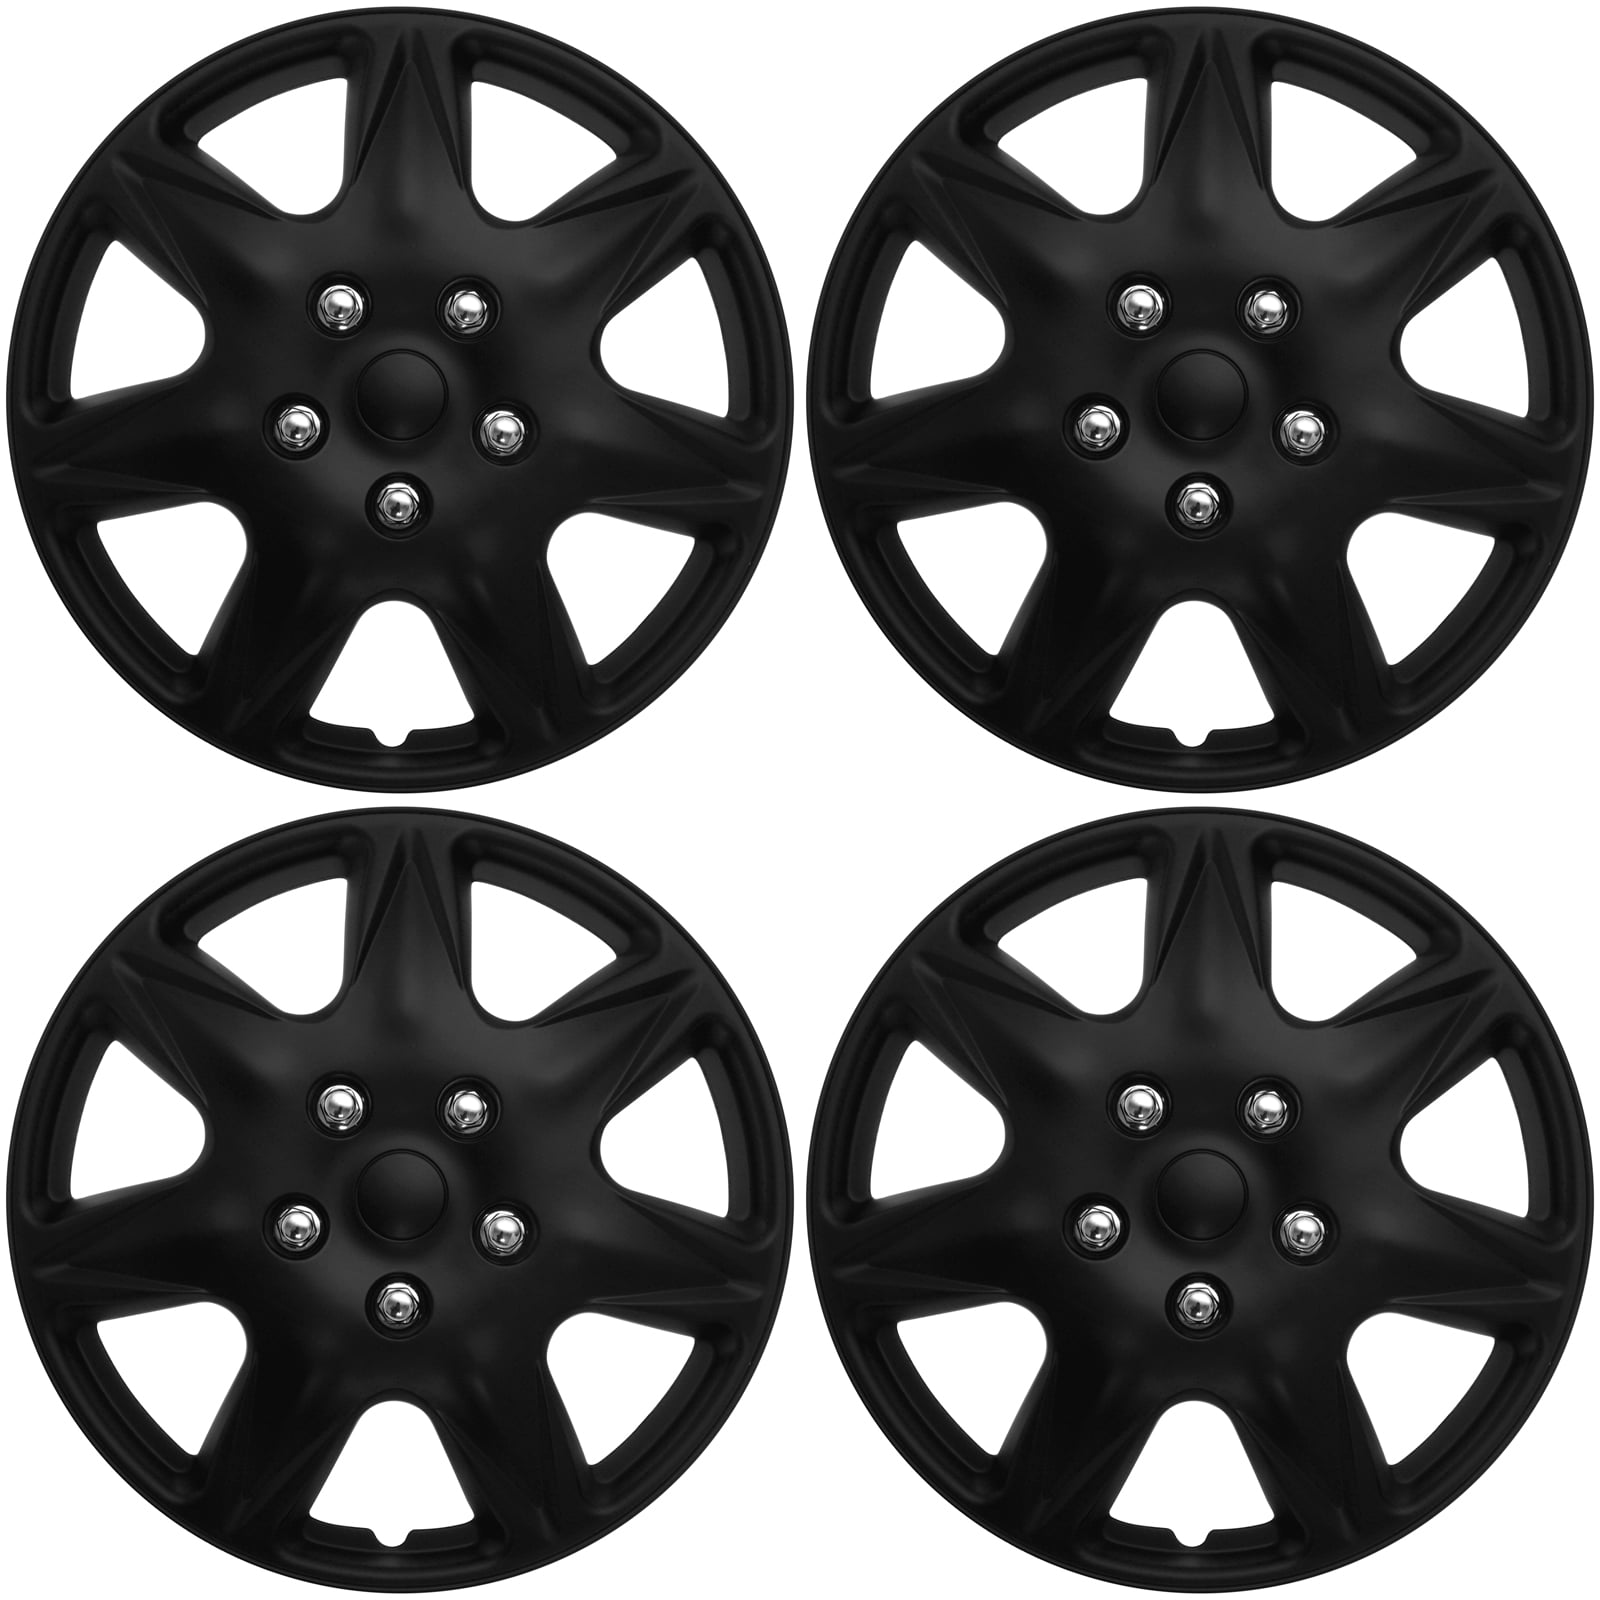 Cover Trend Set of 4 , ONLY FITS 17 inch wheels that take hubcaps Matte Black Hub Caps Wheel Covers 